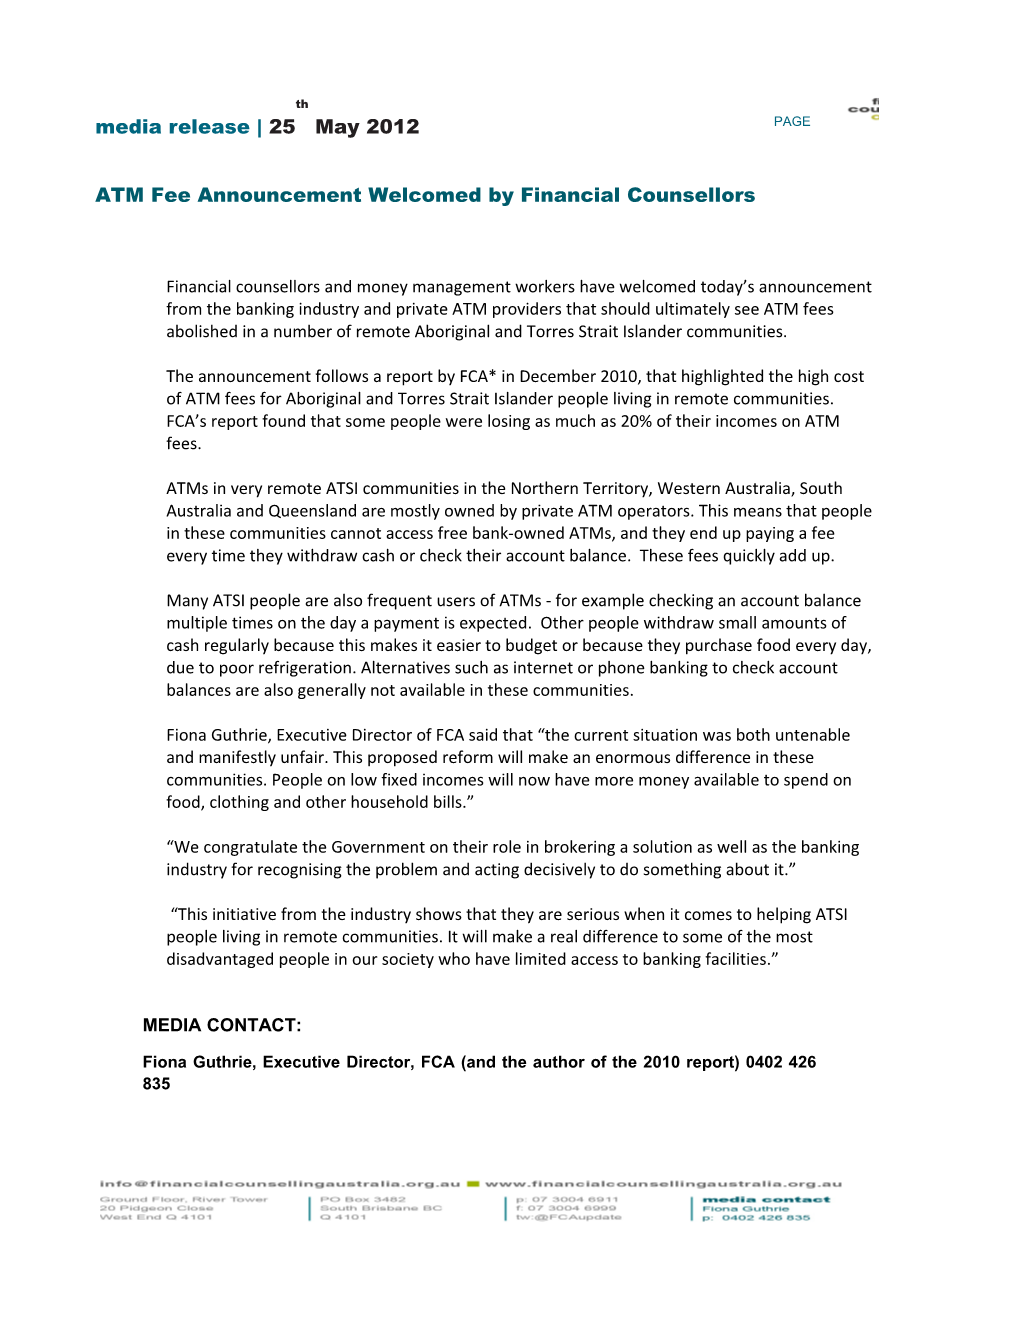 ATM Fee Announcement Welcomed by Financial Counsellors